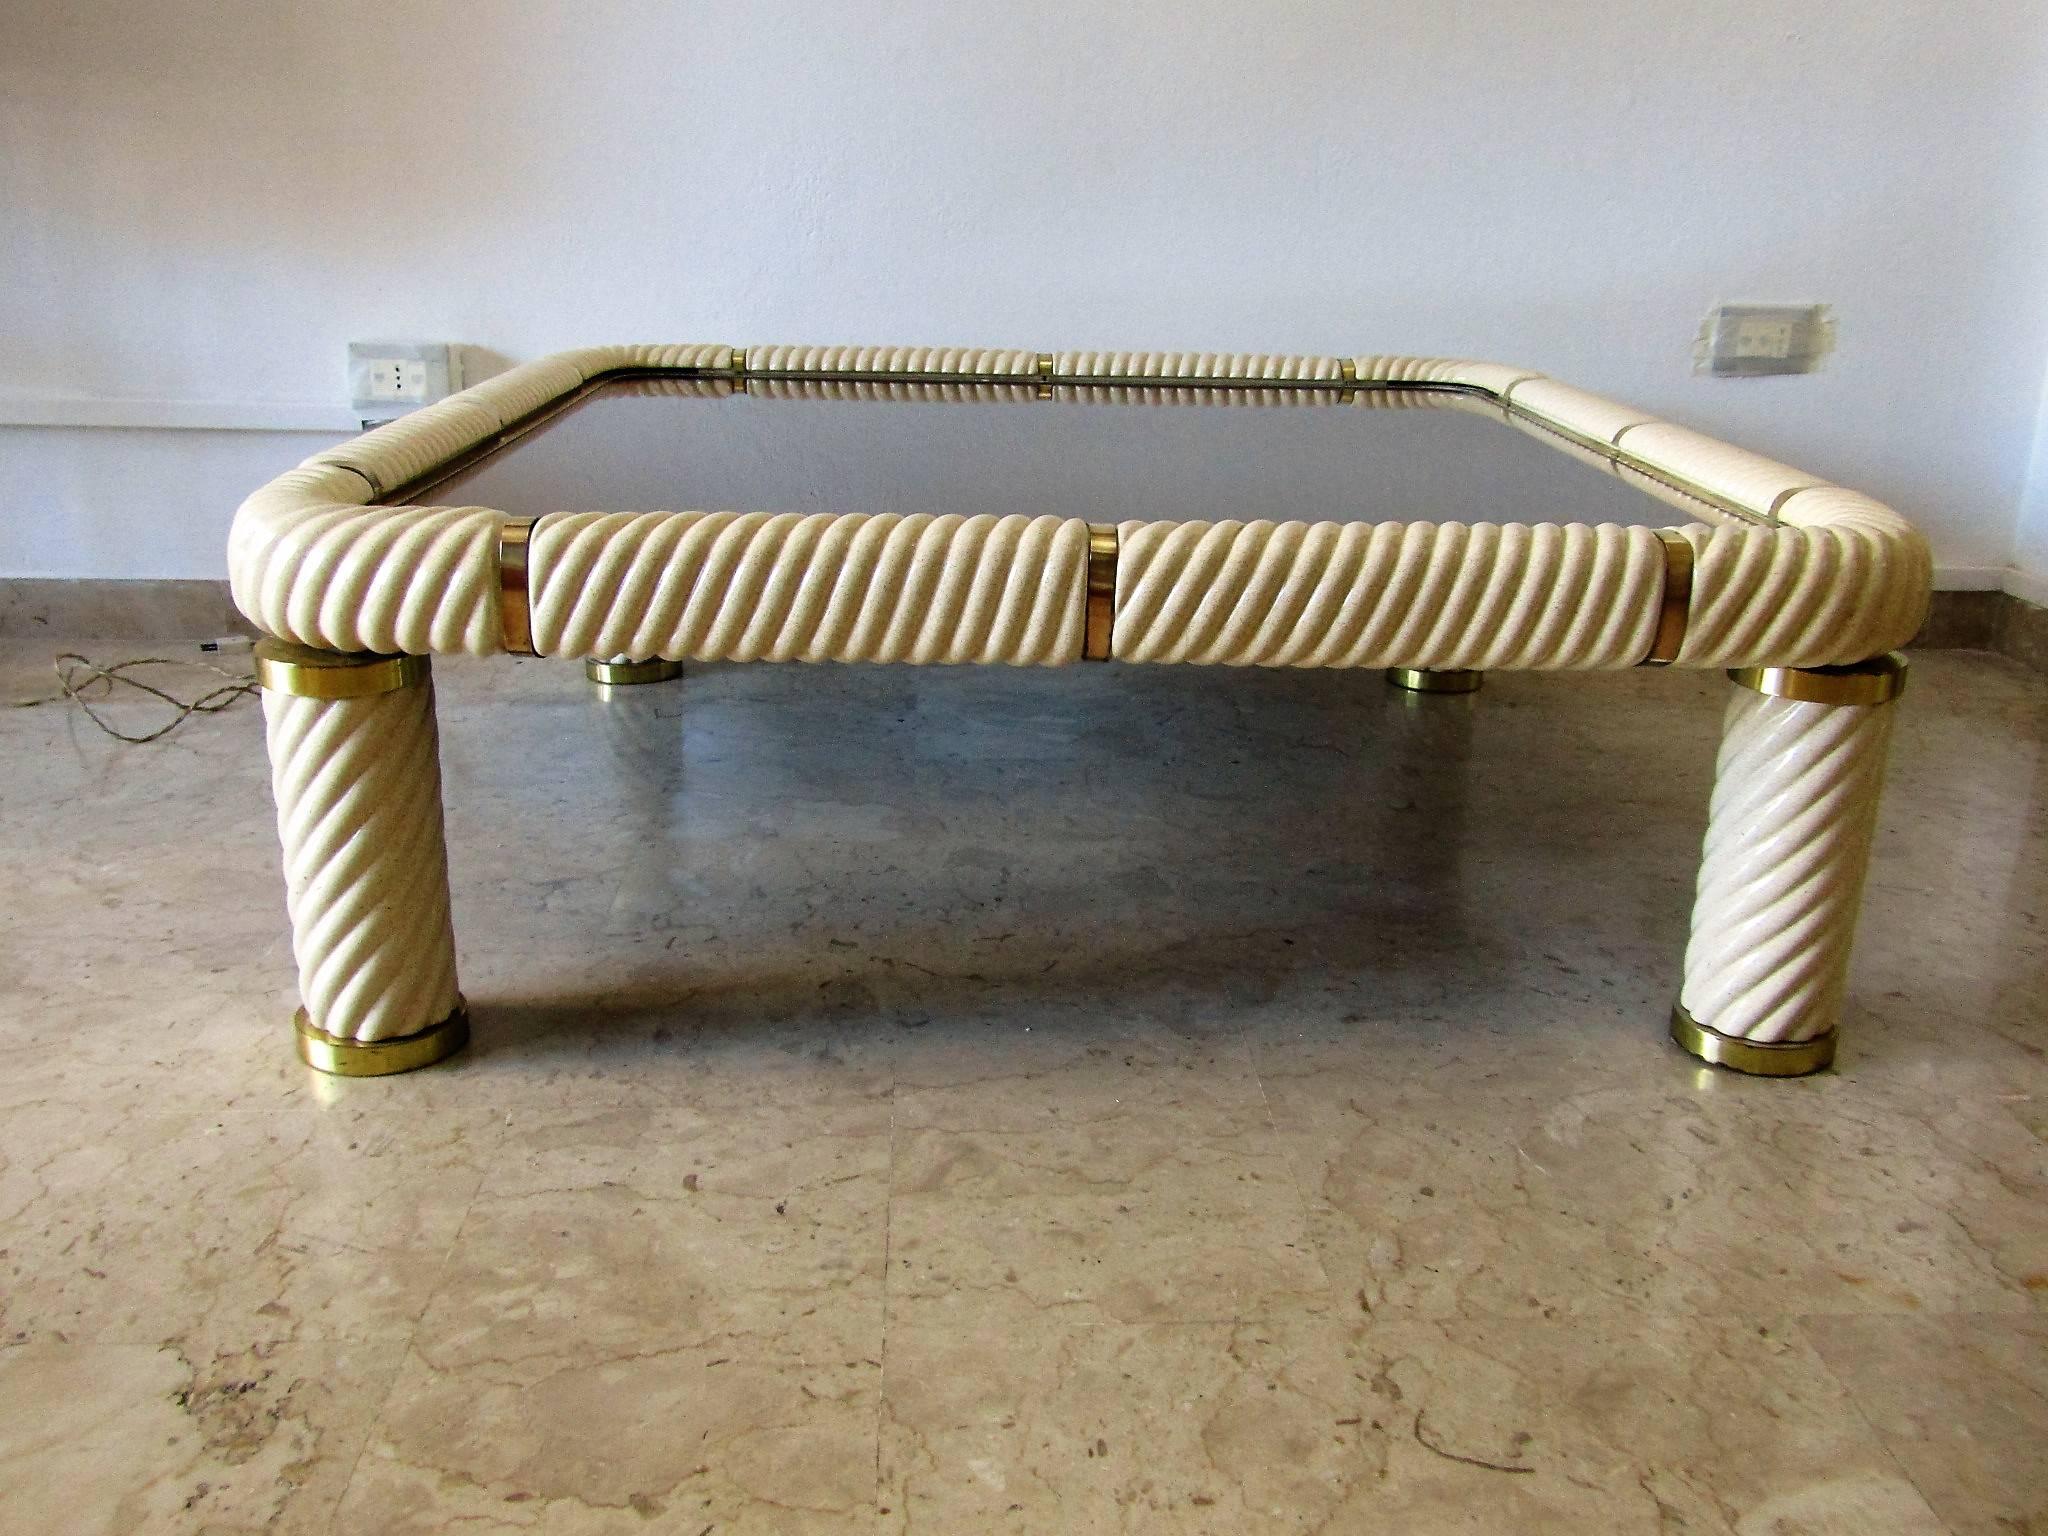 Table coffee by Tommaso Barbi realizzed in ceramics and brass. In the Hollywood Regency style.
This remarkable piece has legs spiraling column porcelain shape and top with decorative solid brass supports throughout. The glass insert gray glass